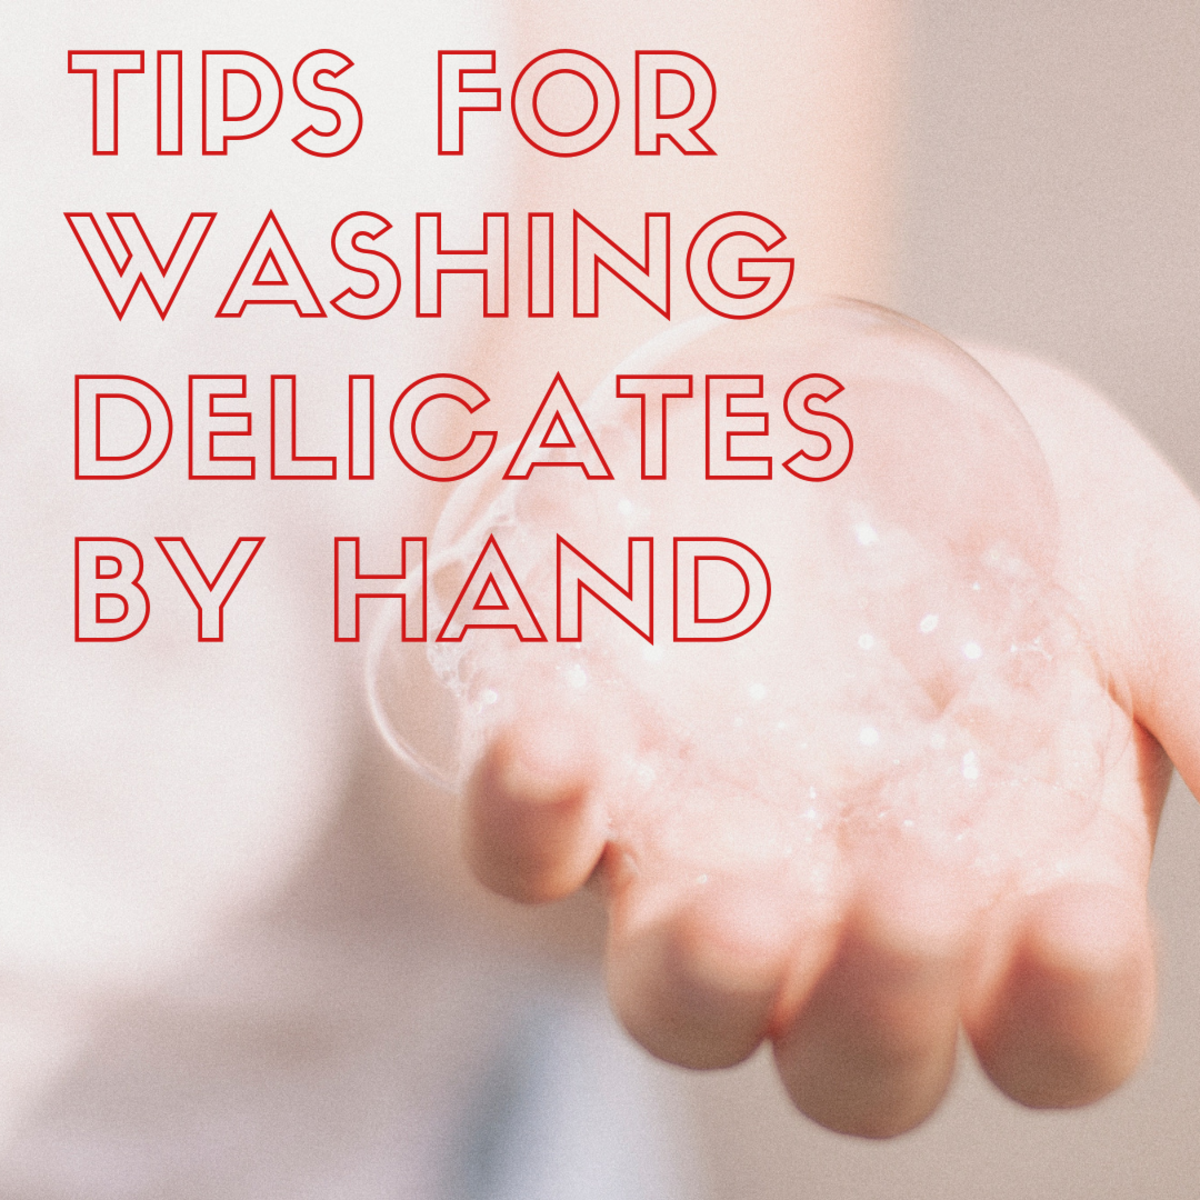 How to Wash Delicate Clothing and Undergarments by Hand